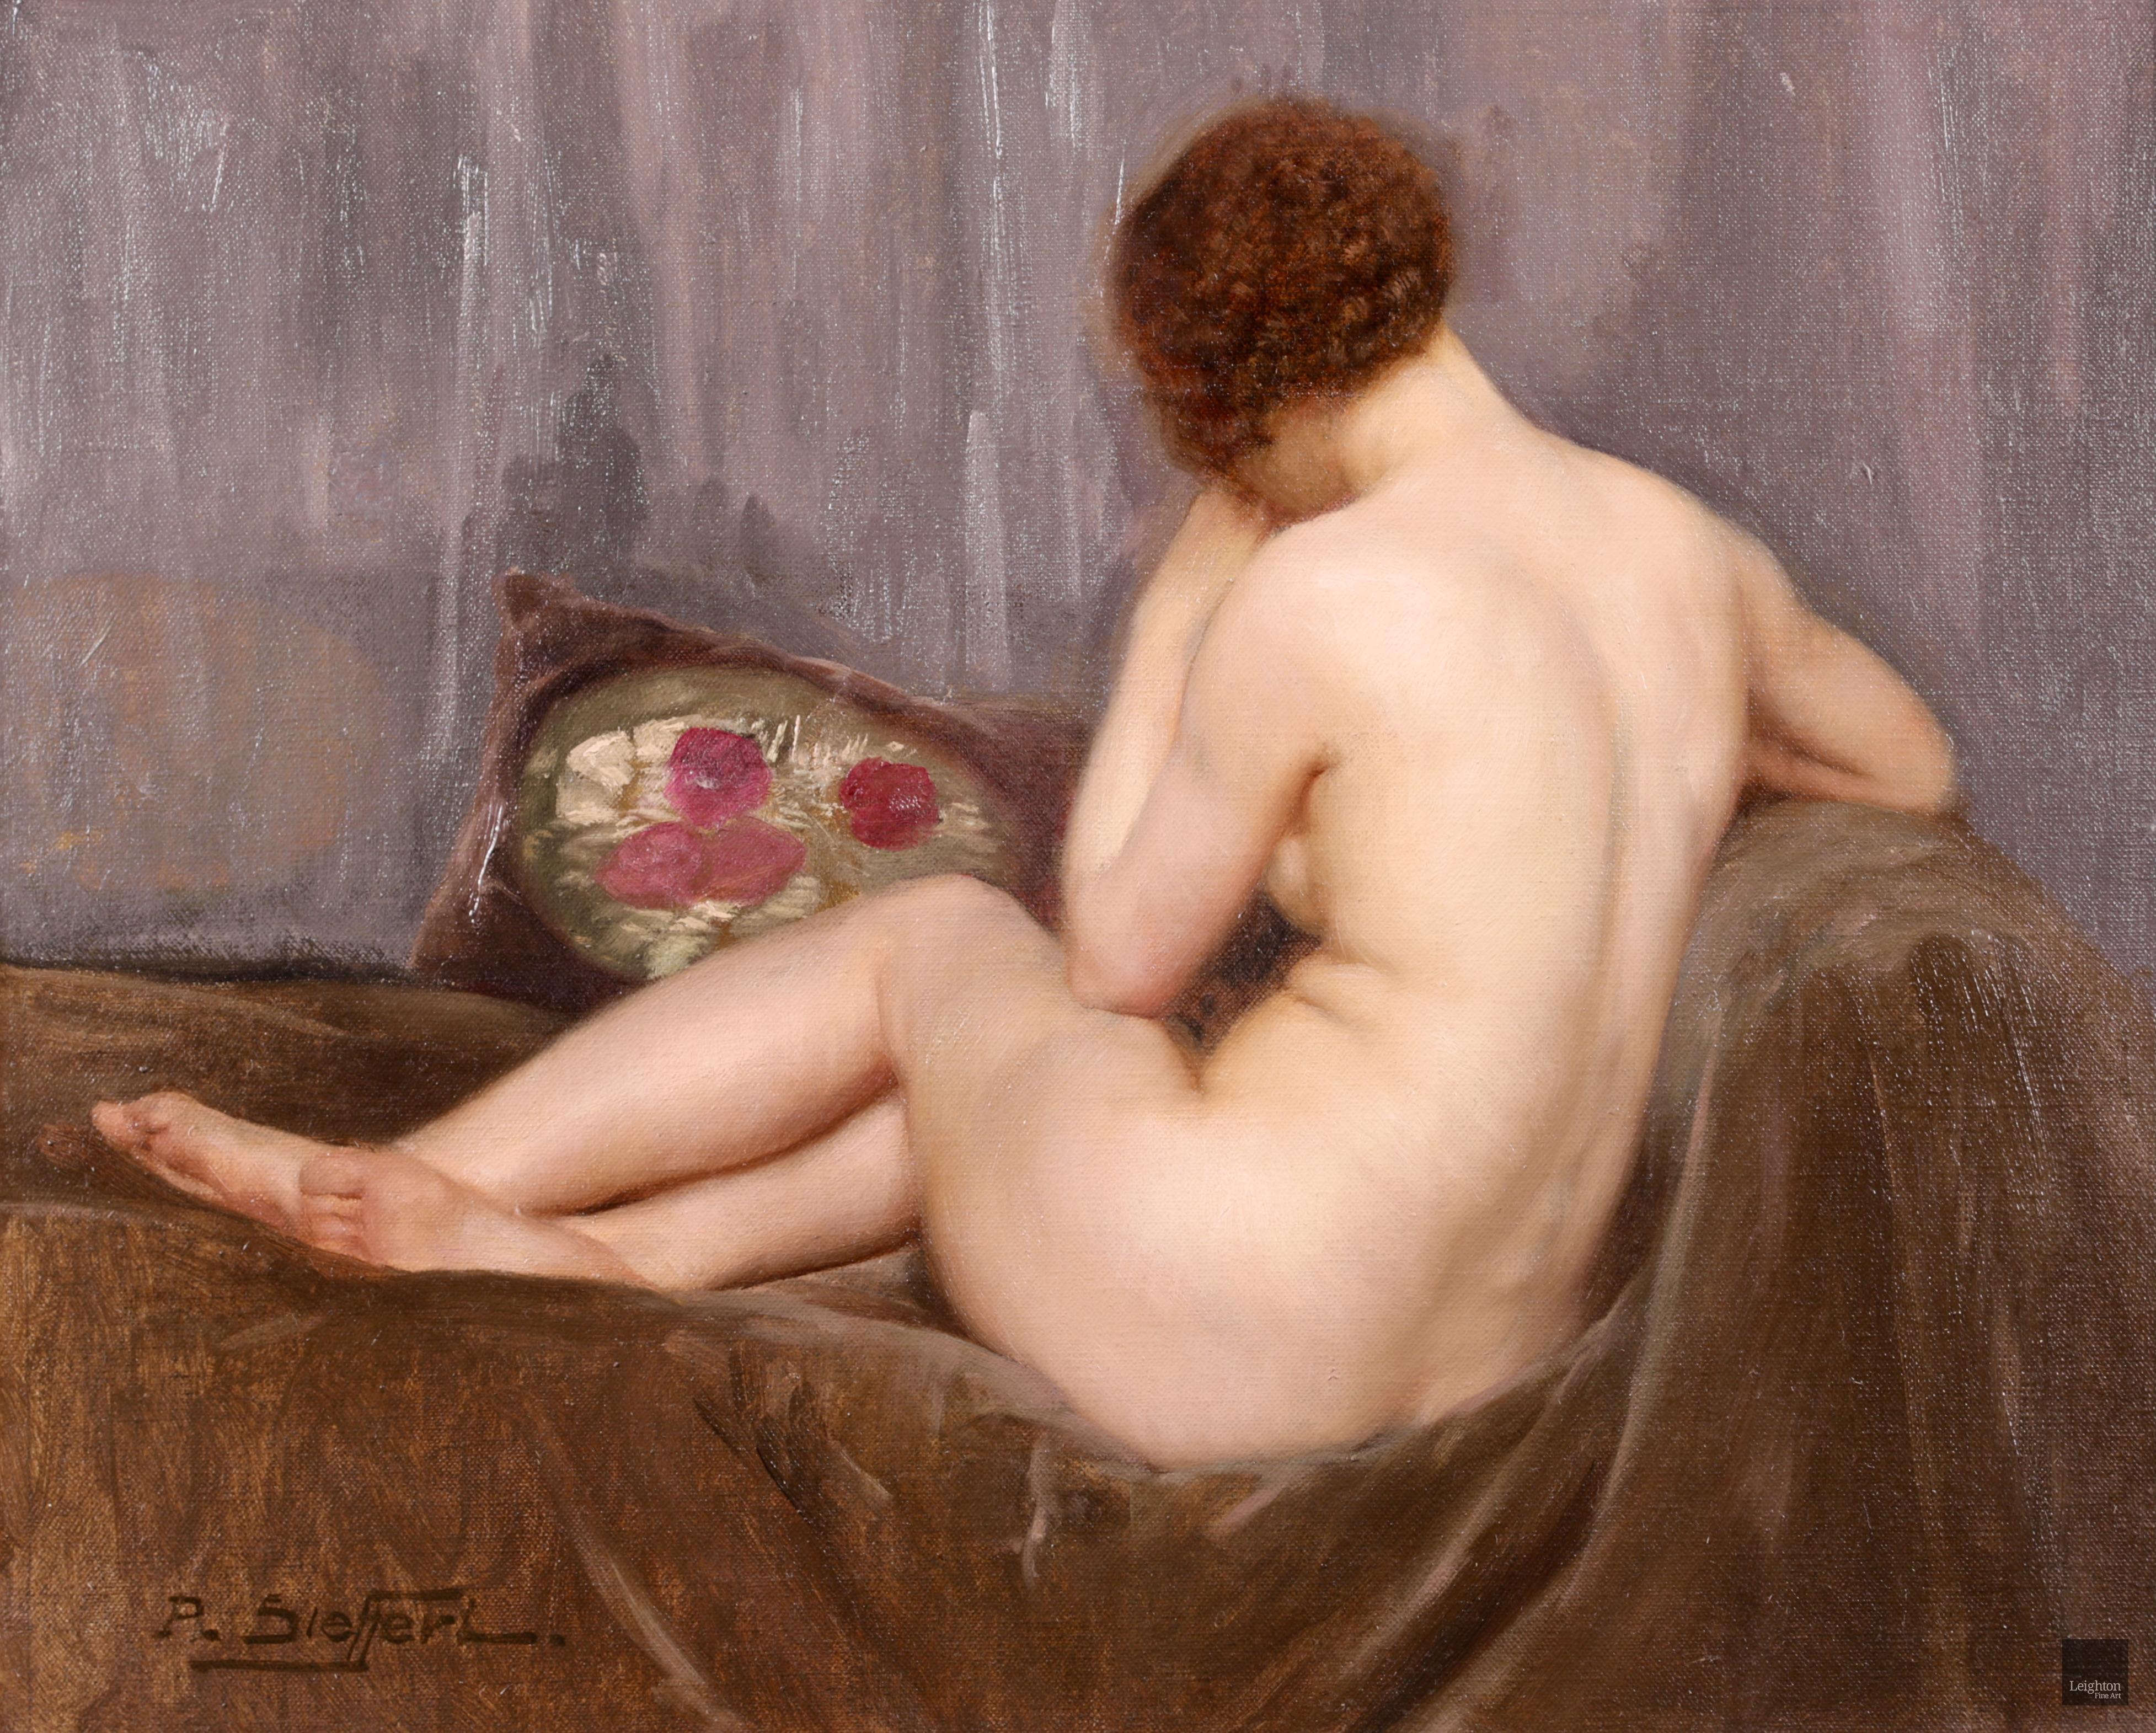 Signed impressionist oil on canvas circa 1920 by French painter Paul Sieffert. The piece depicts a nude red-haired woman facing away from the artist resting on a brown fur rug laid upon a chaise longue.

Signature:
Signed lower